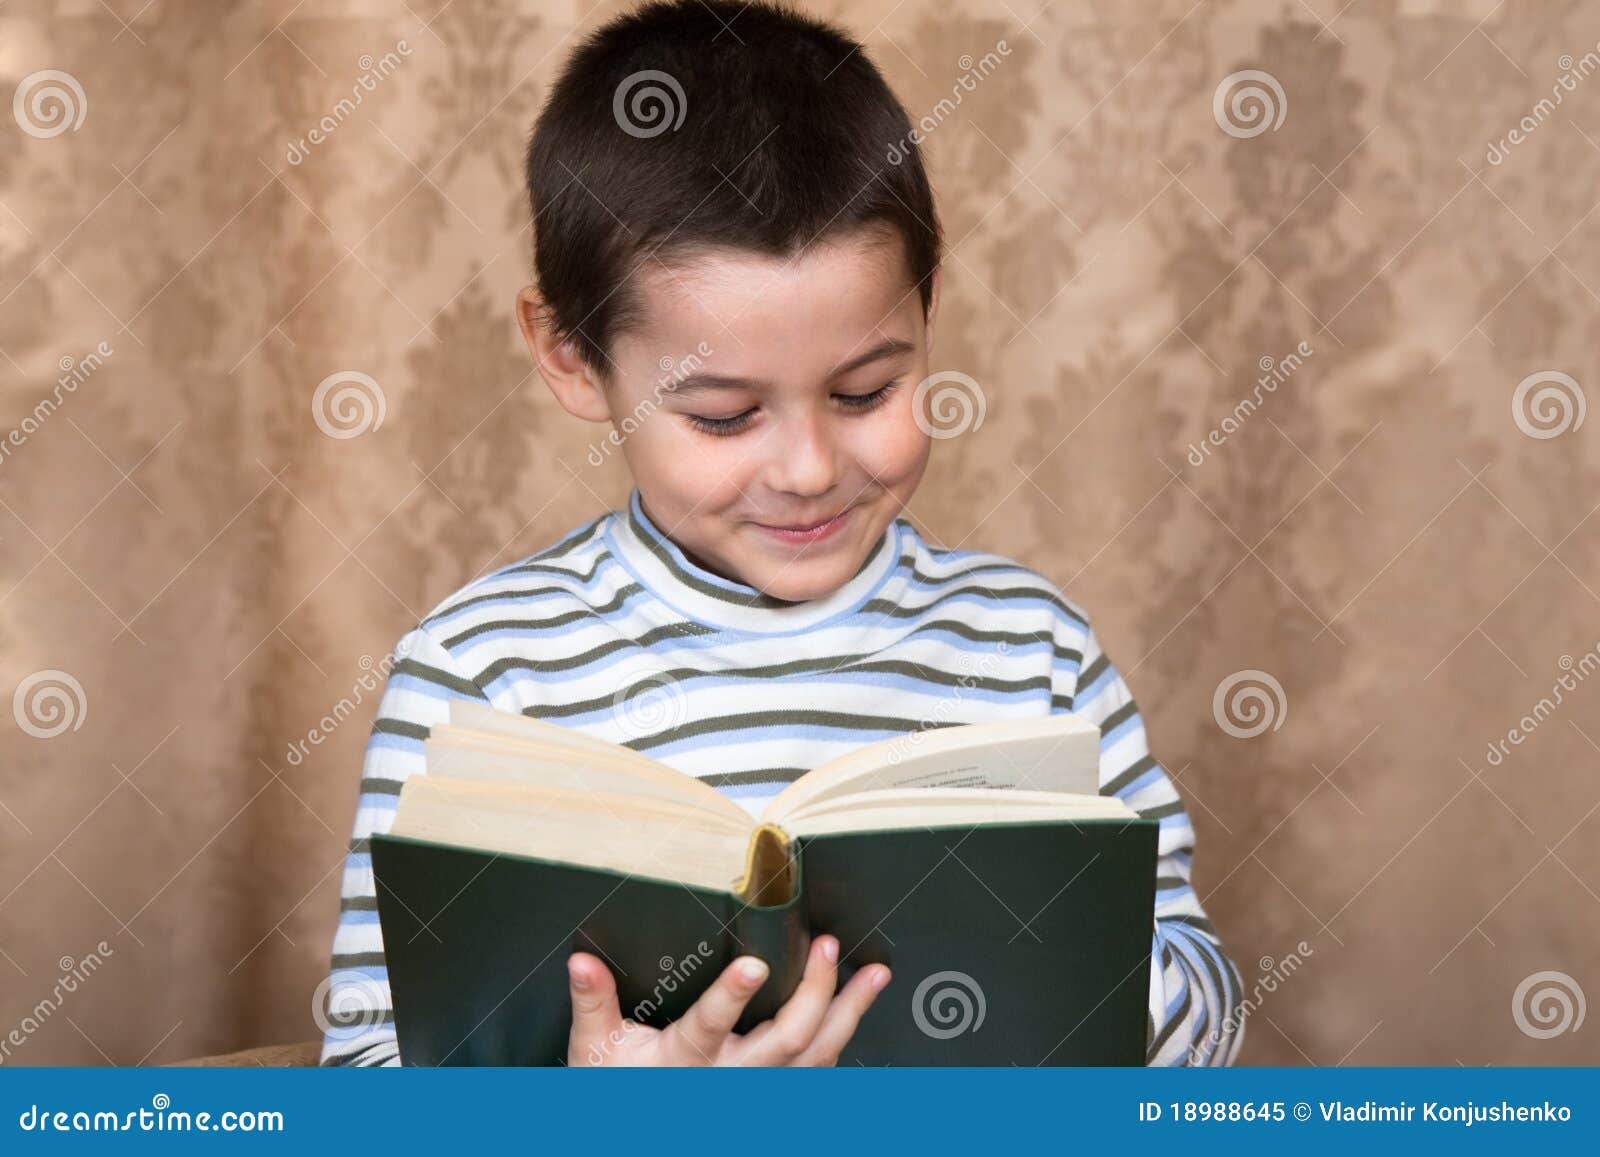 Boy And Book Stock Image Image Of Education Book Schoolboy 18988645